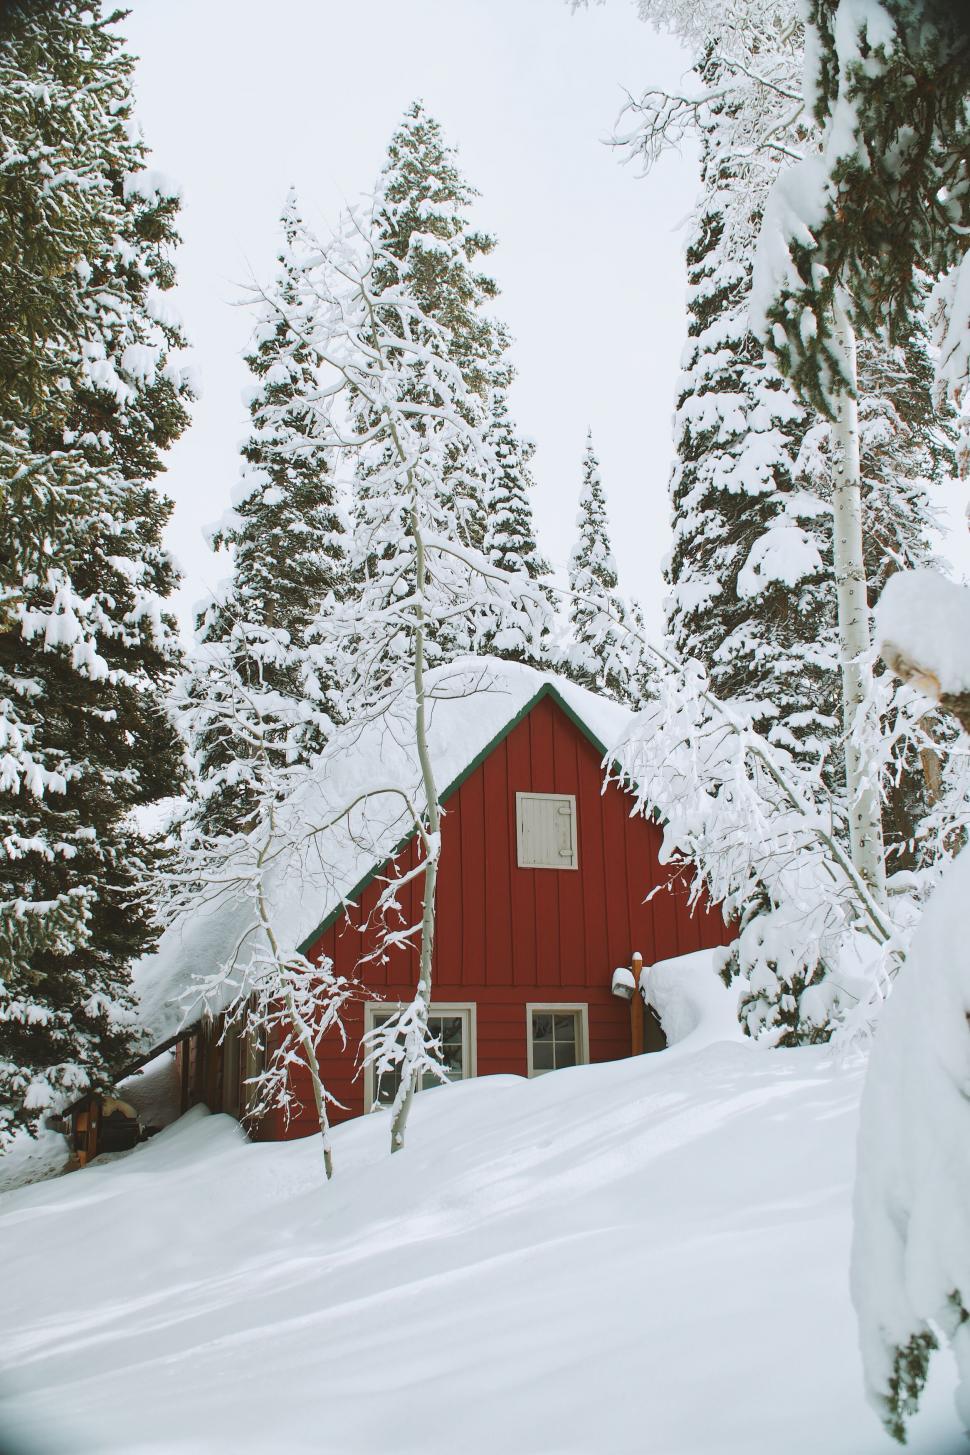 Free Image of Red cabin surrounded by snowy trees 